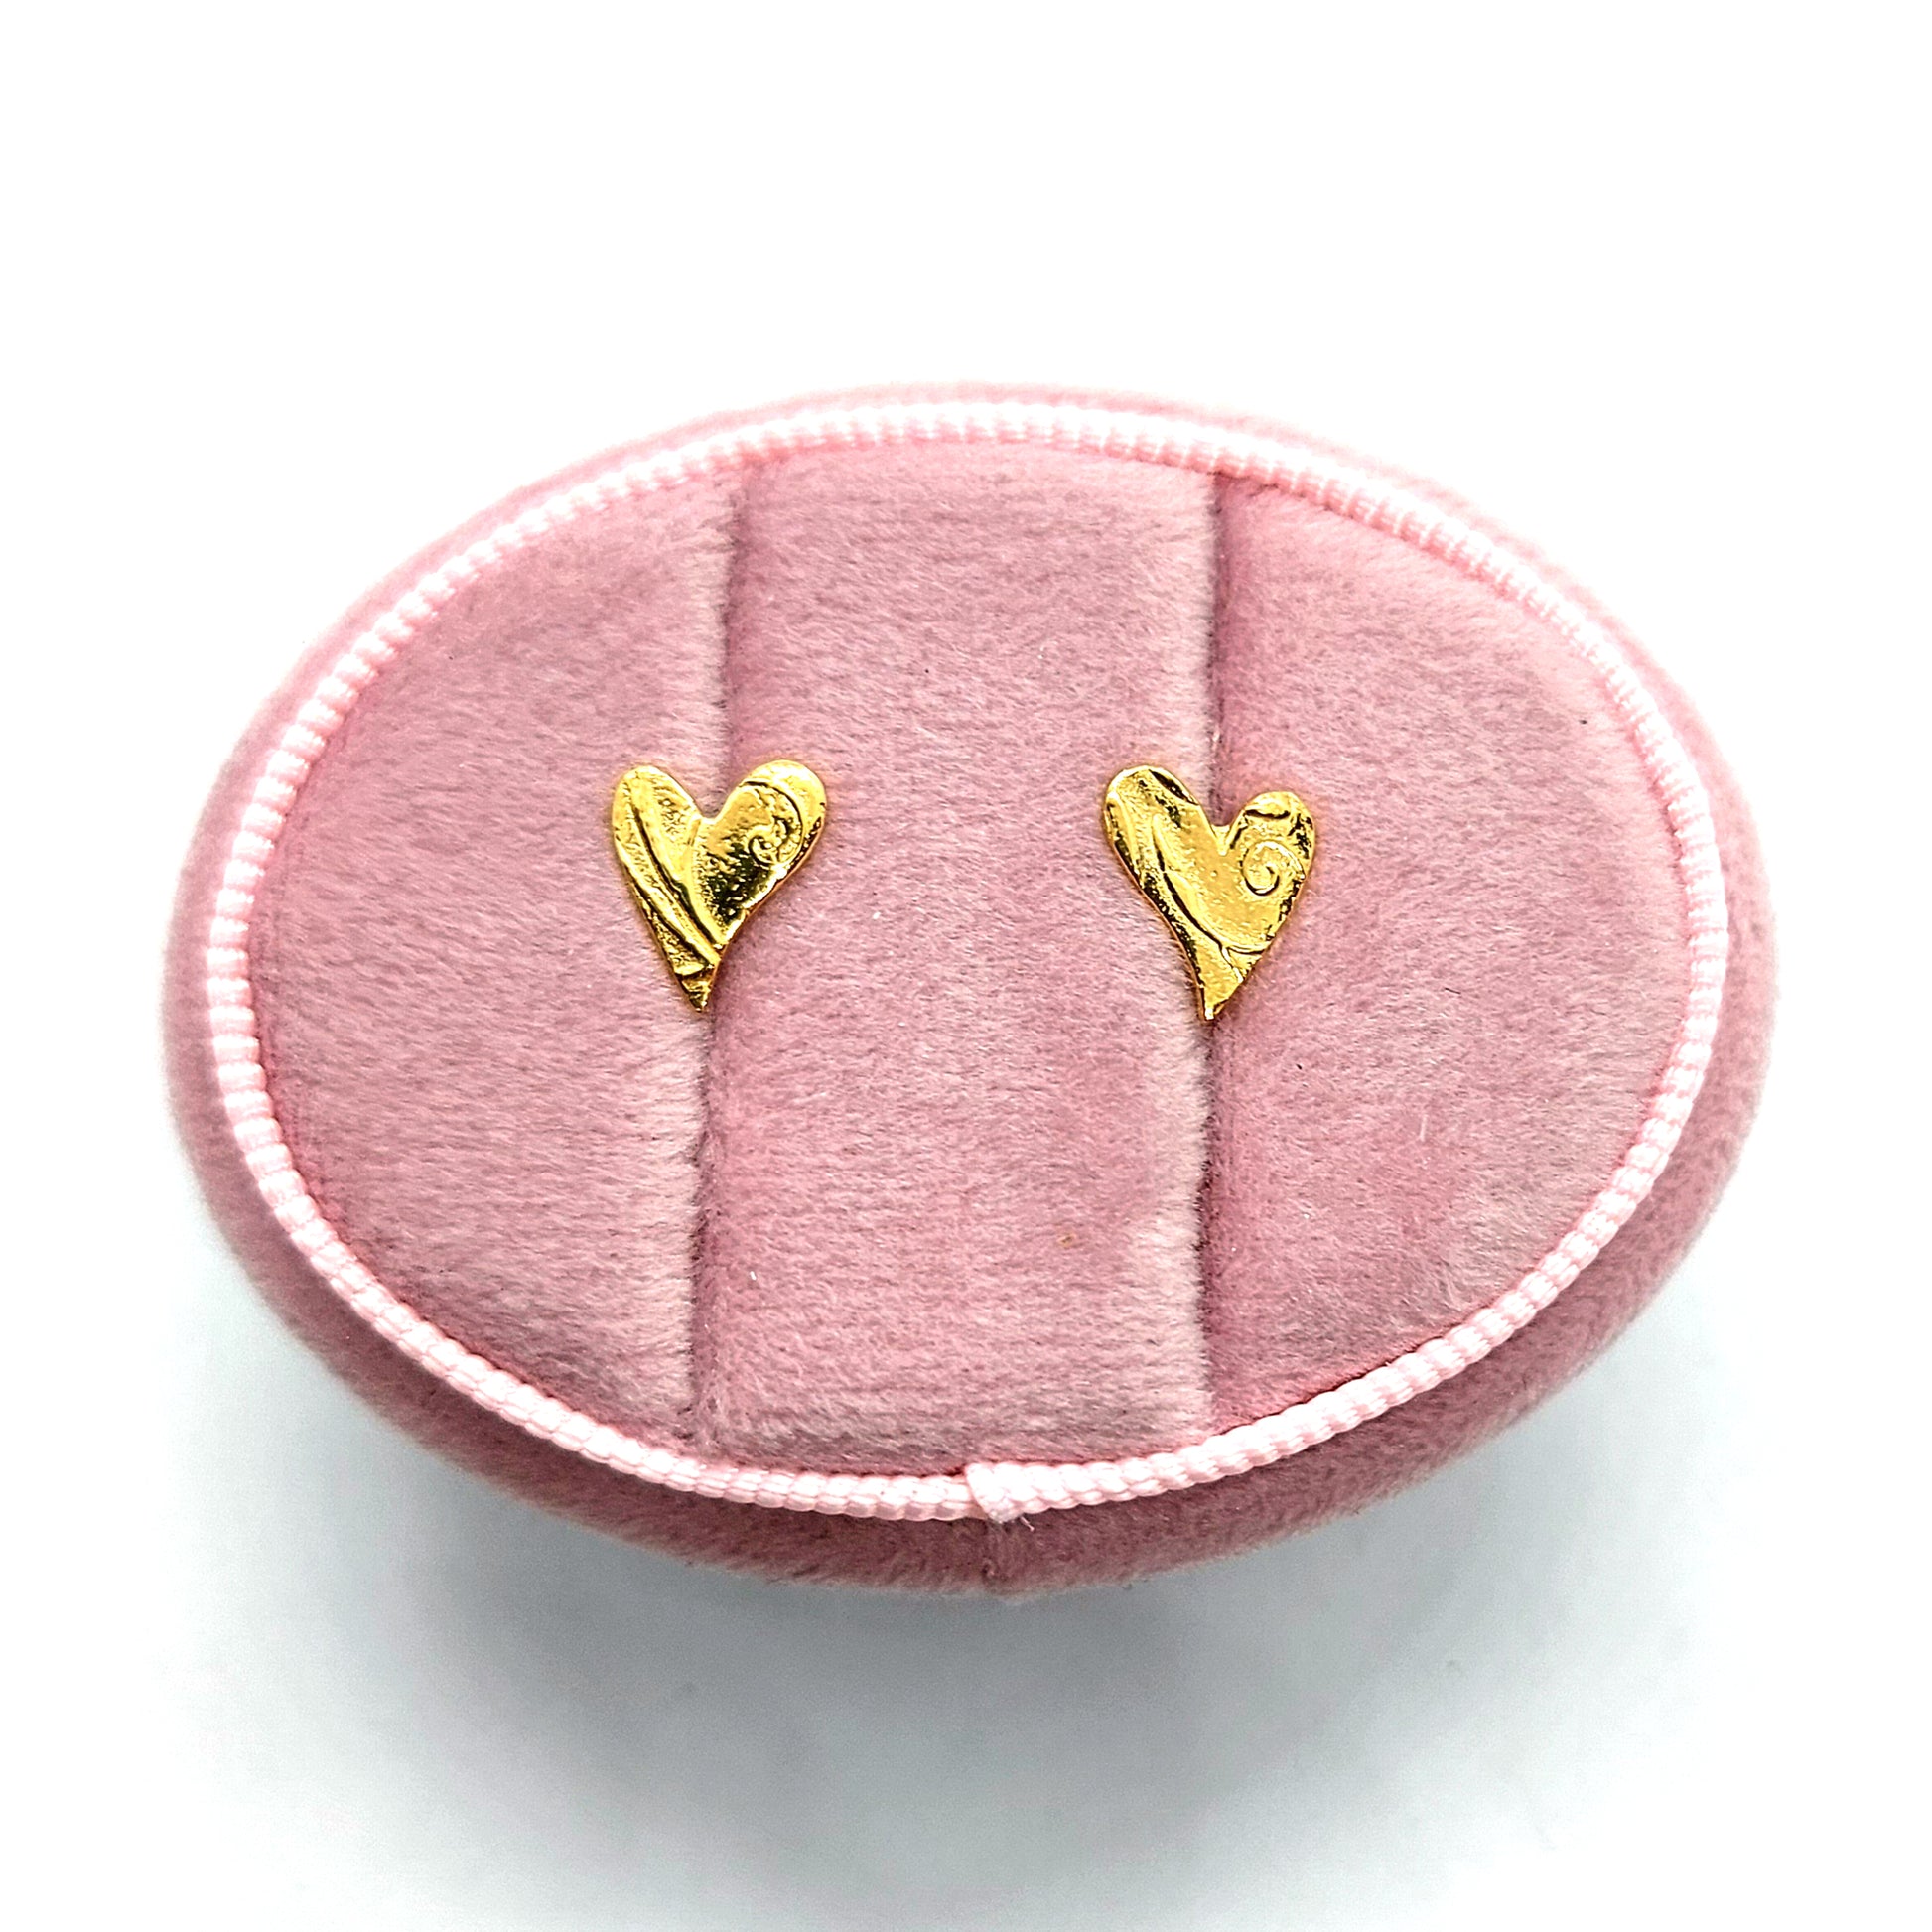 Yellow gold vermeil asymmetrical heart stud earrings with a swirl pattern. Pictured in a pink jewellery box.